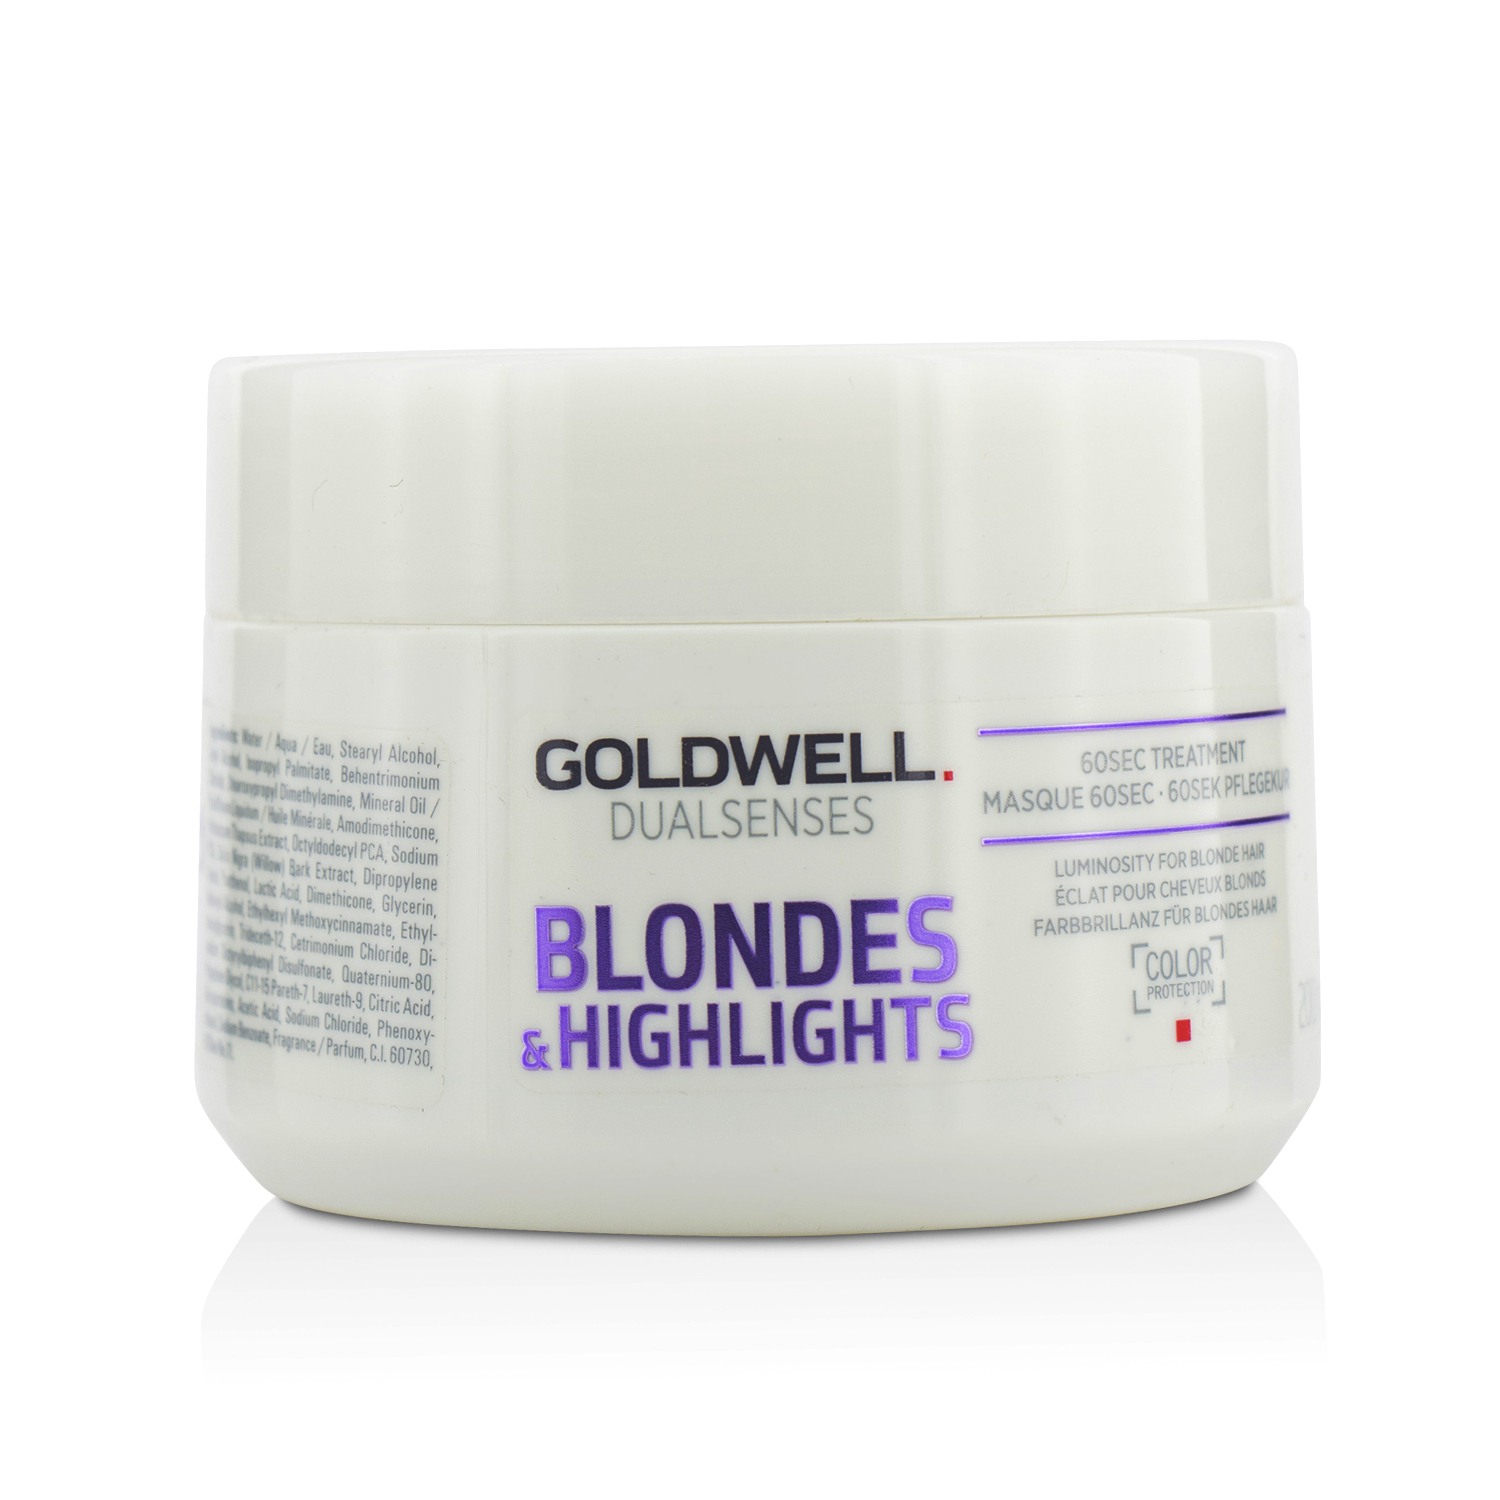 Dual Senses Blondes & Highlights 60Sec Treatment (Luminosity For Blonde Hair) Goldwell Image